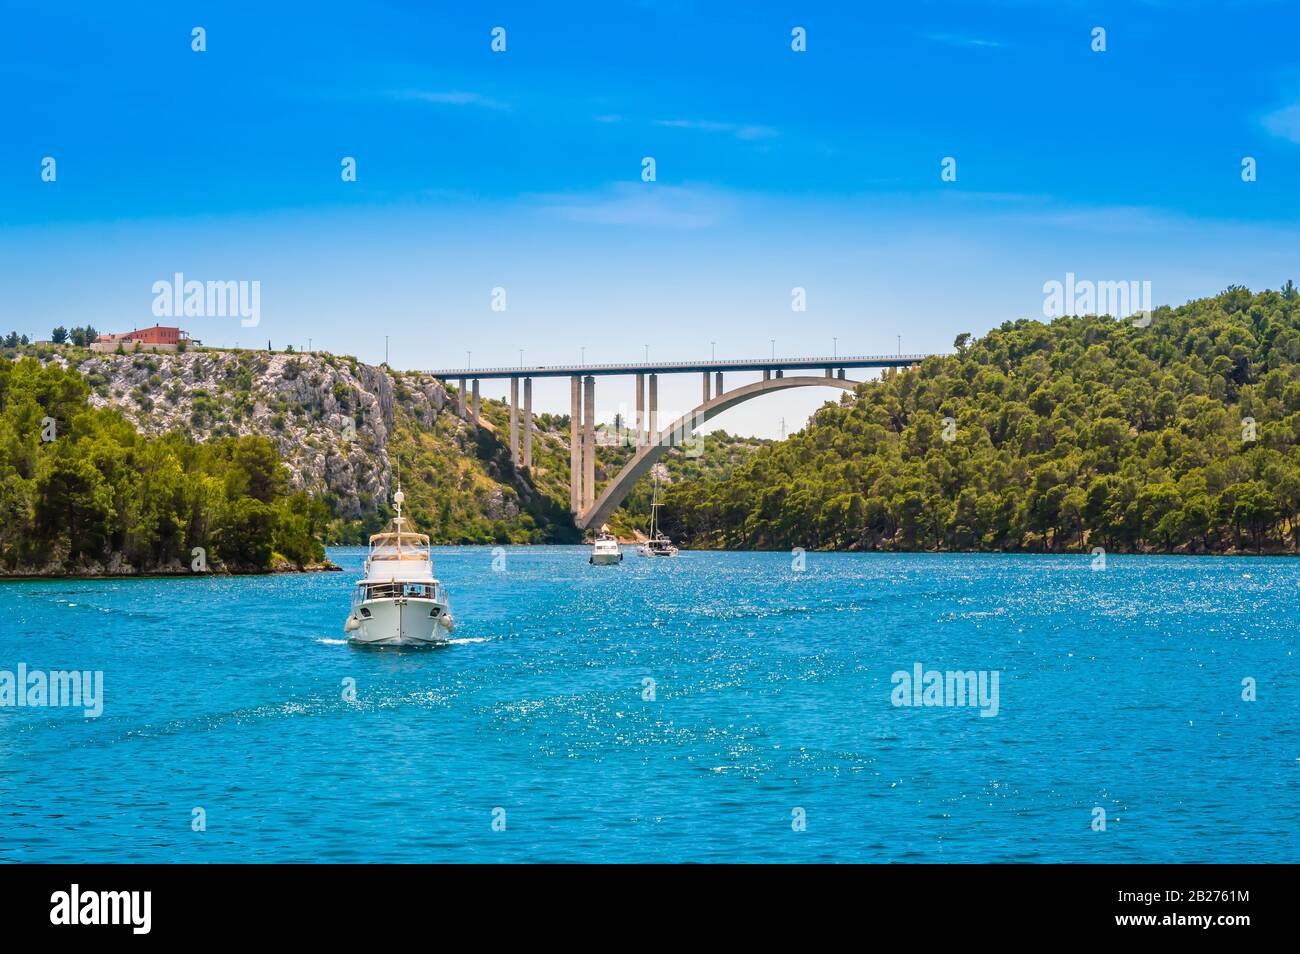 Tourist boats in Krka National Park, Croatia. Sibenik bridge over Krka River with clear water and blue sky on a sunny day. Stock Photo